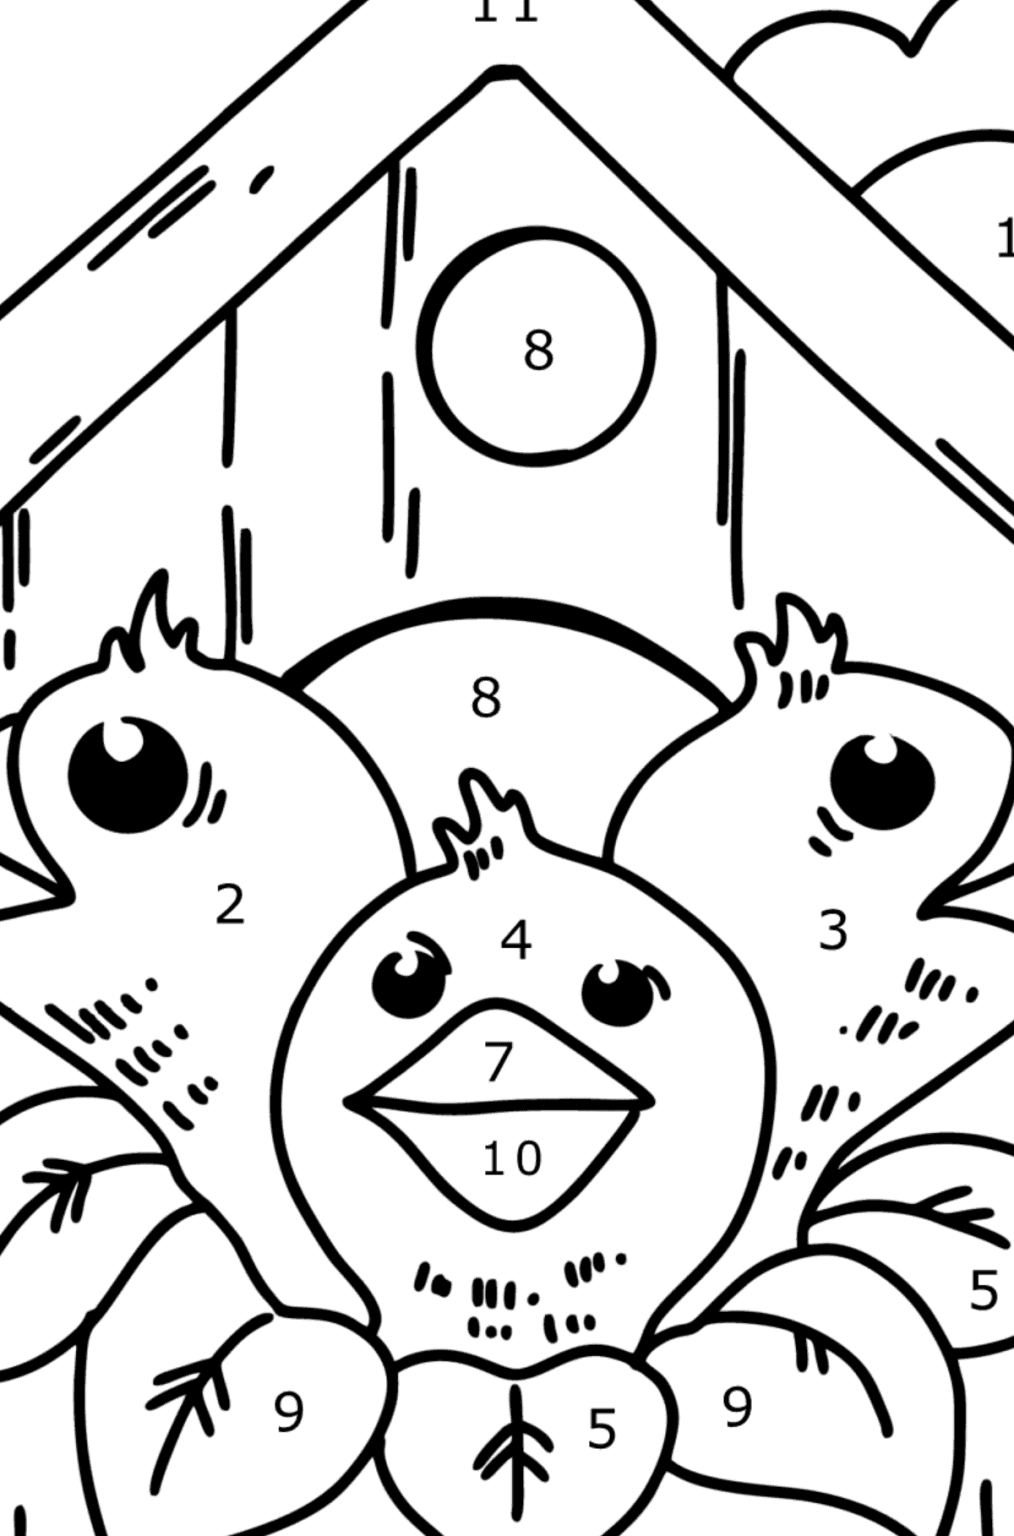 Chicks in a Birdhouse coloring page ♥ Online and Print for Free!